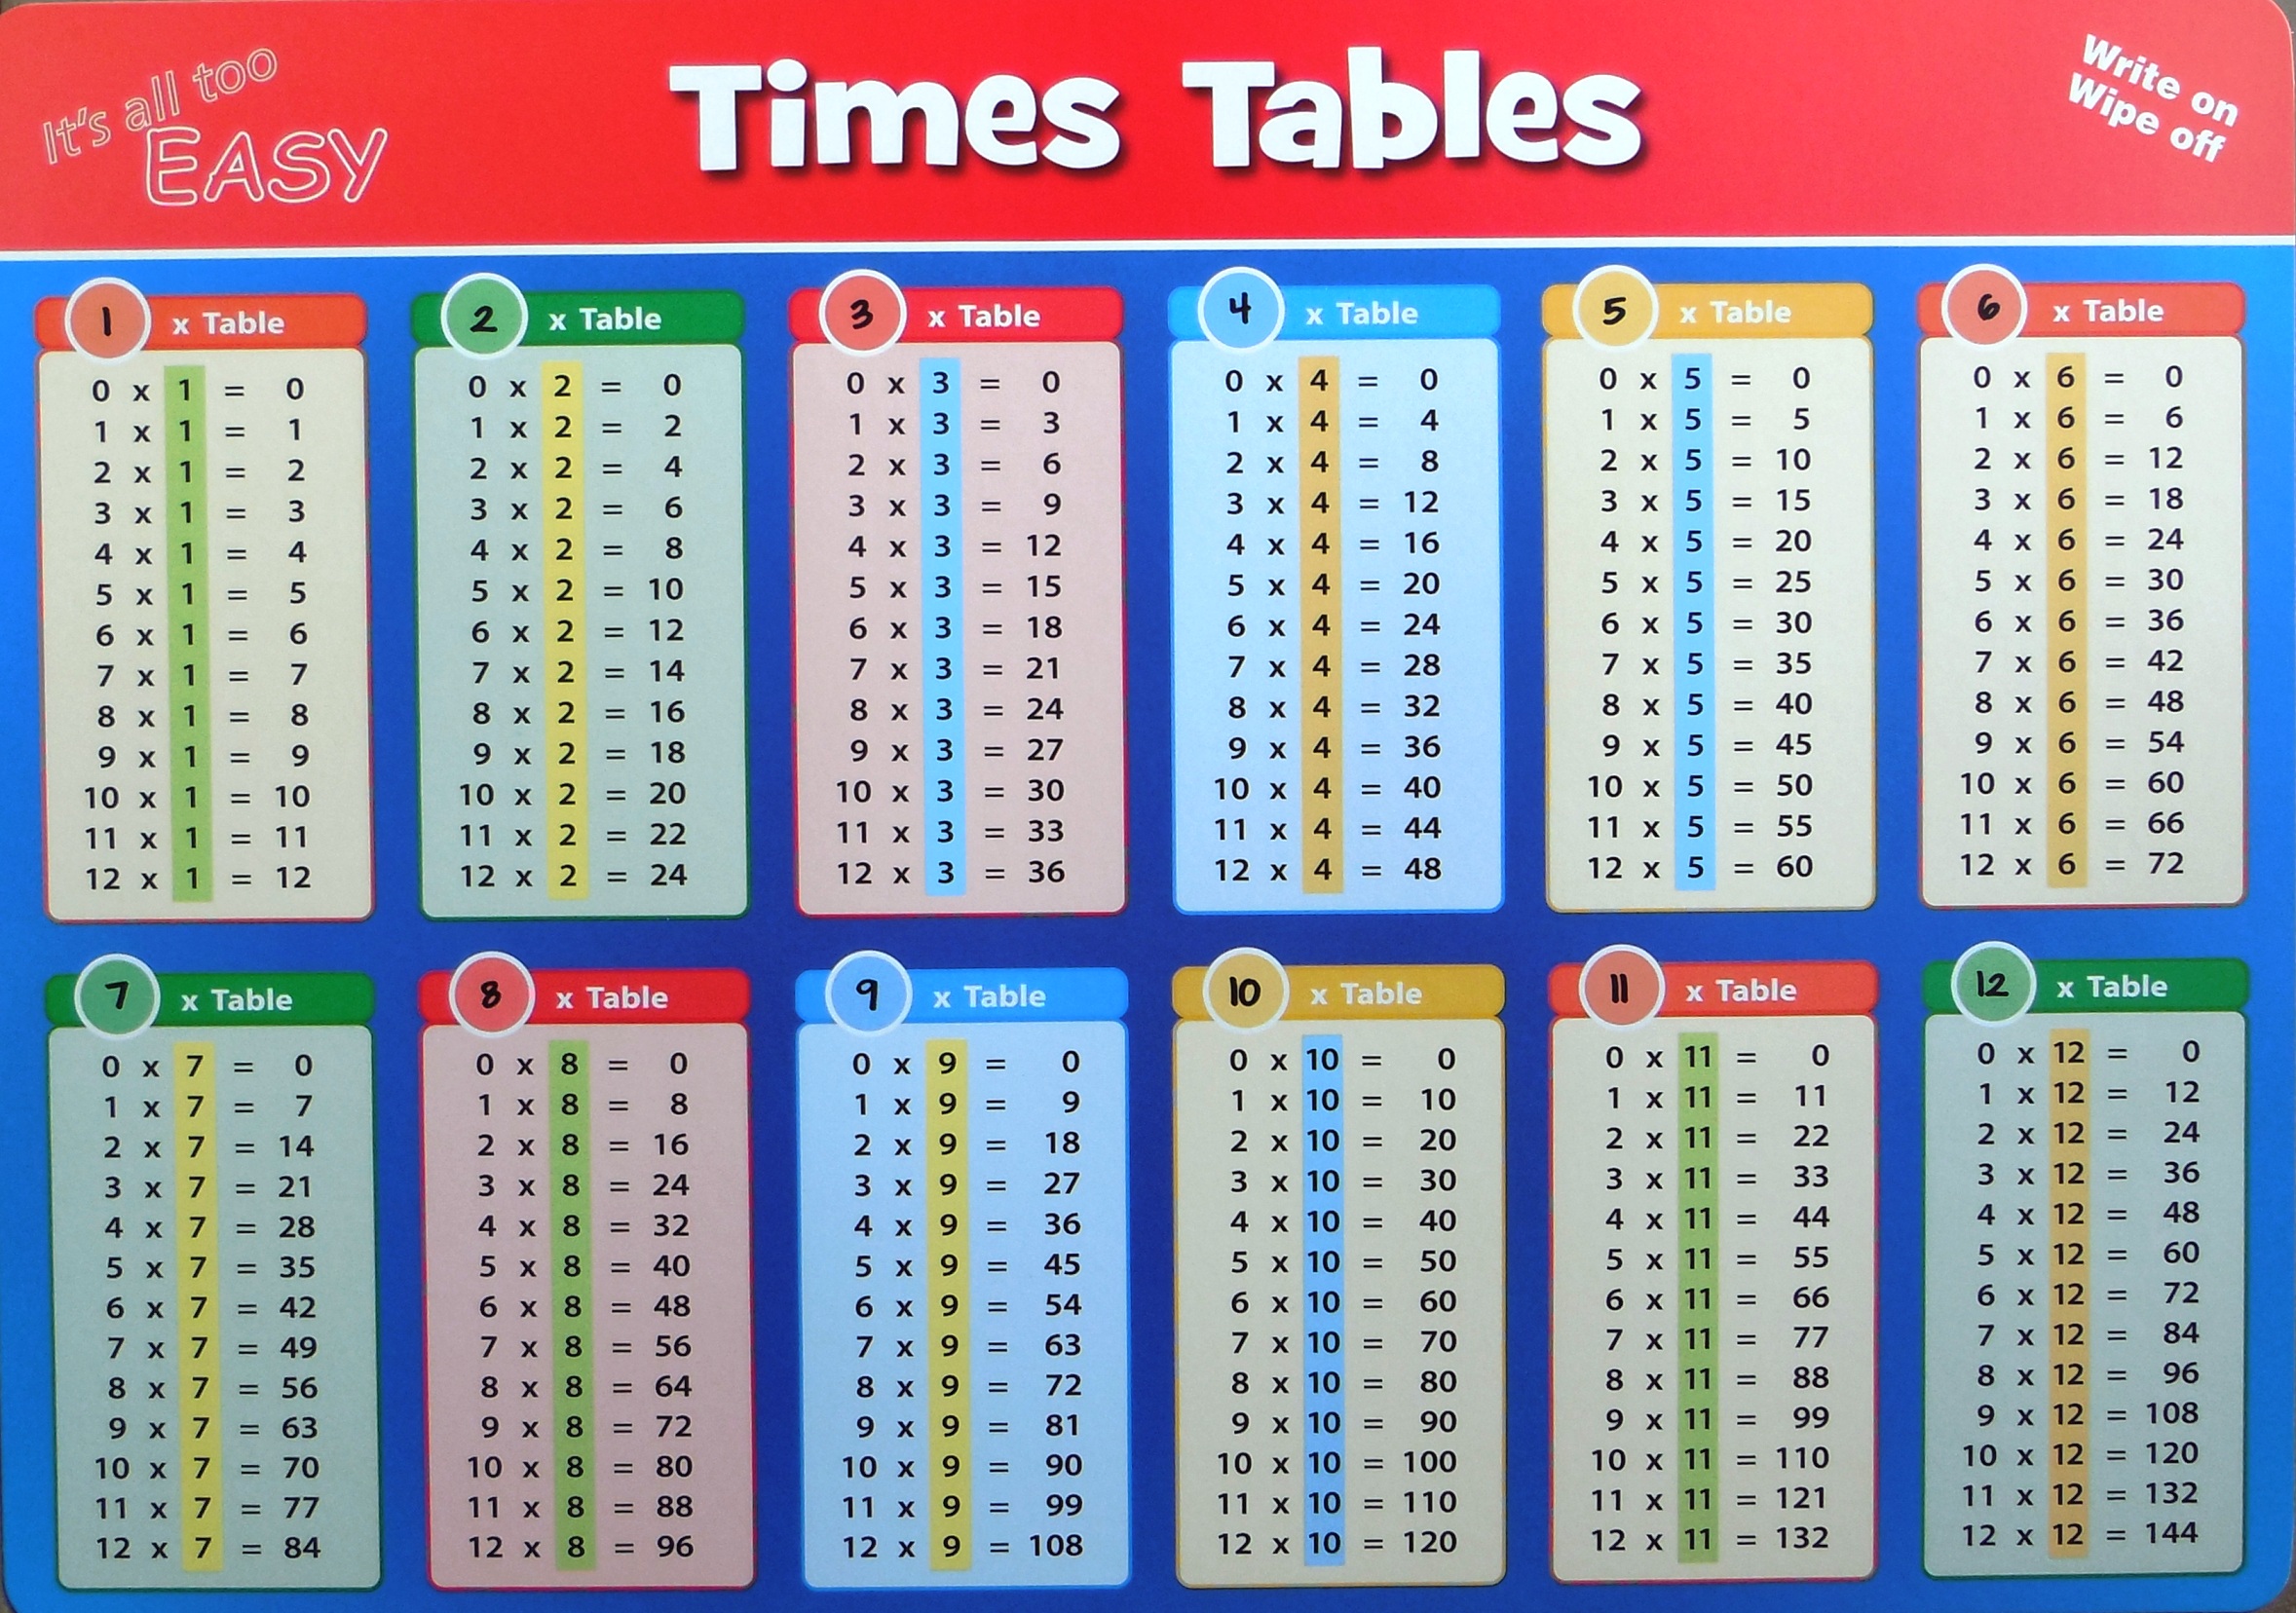 How To Memorize 12 Times Tables